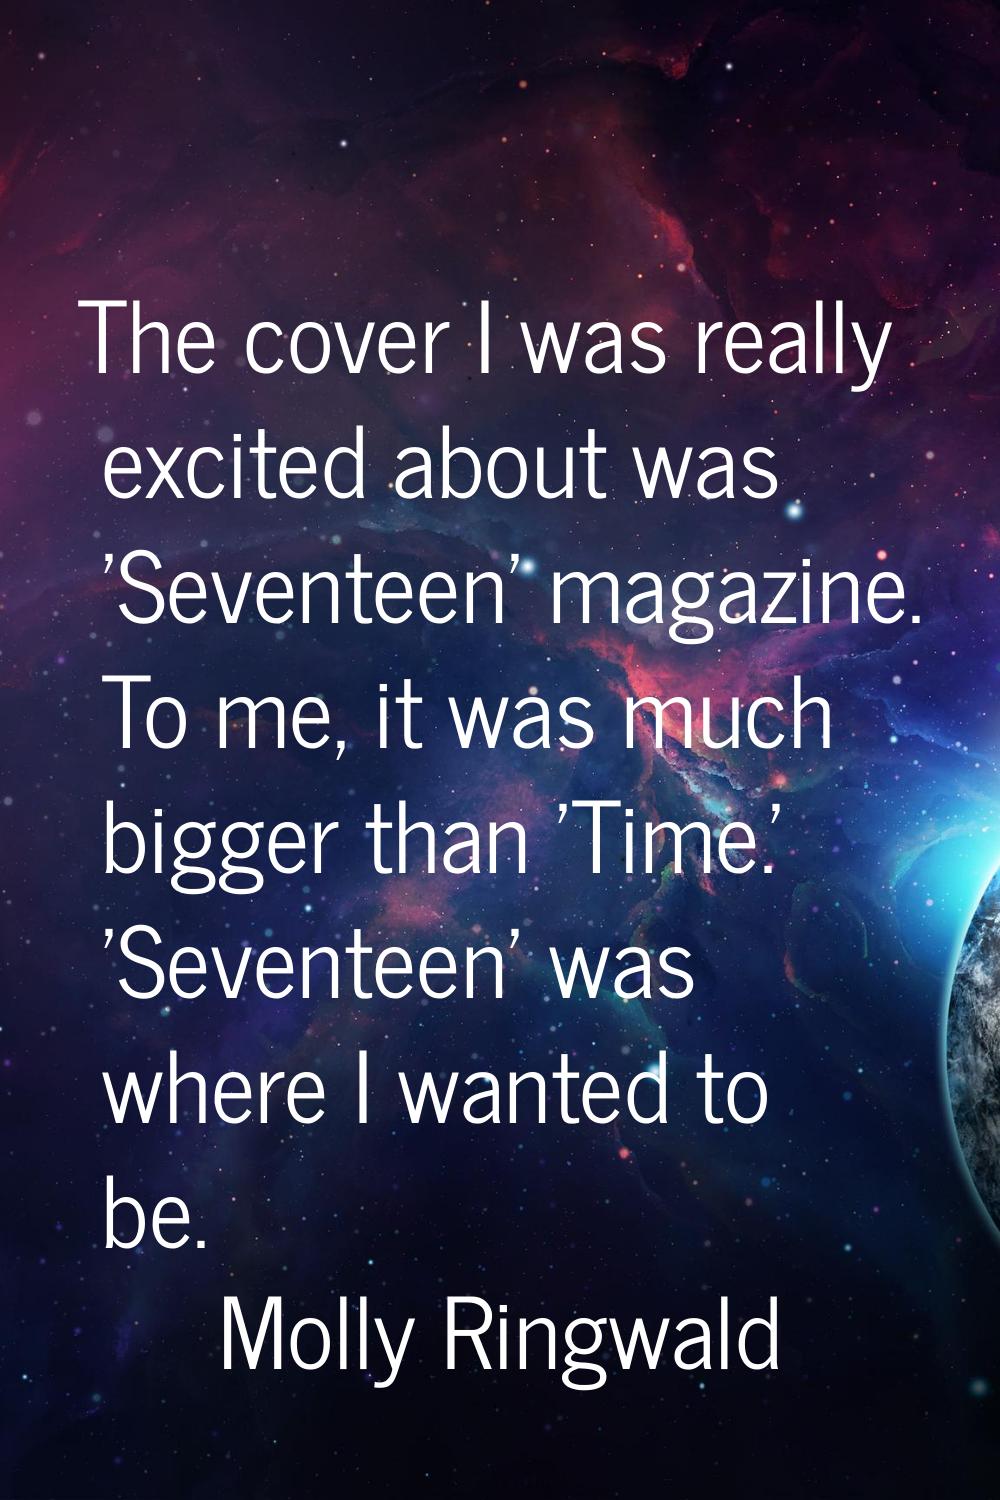 The cover I was really excited about was 'Seventeen' magazine. To me, it was much bigger than 'Time